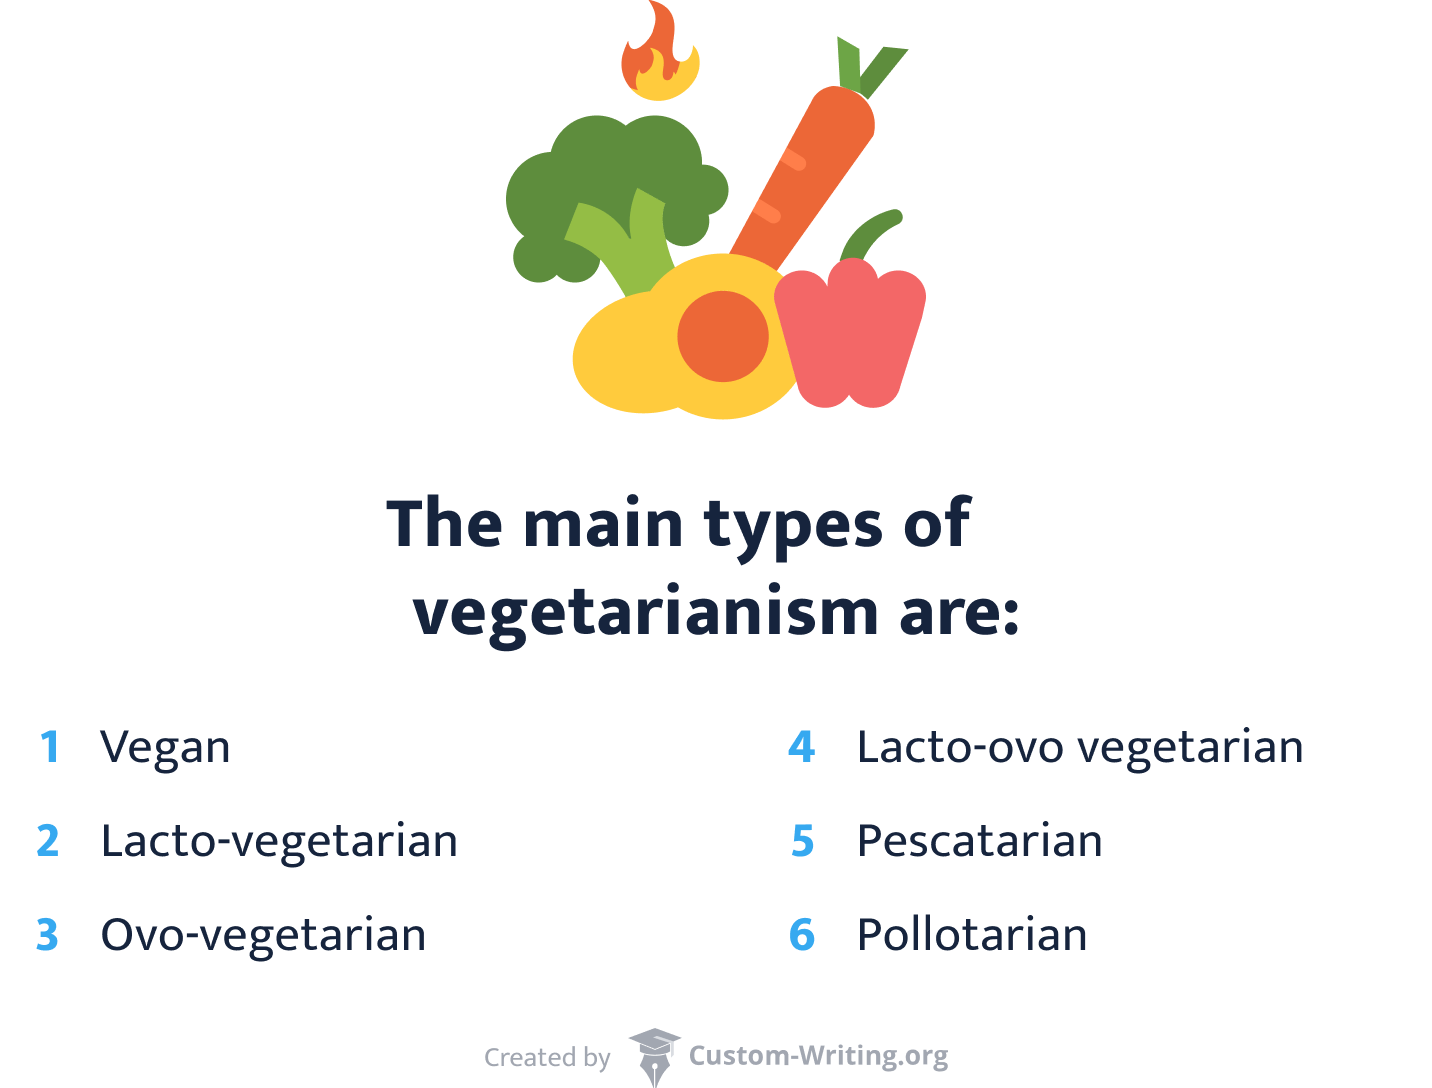 The main types of vegetarianism.